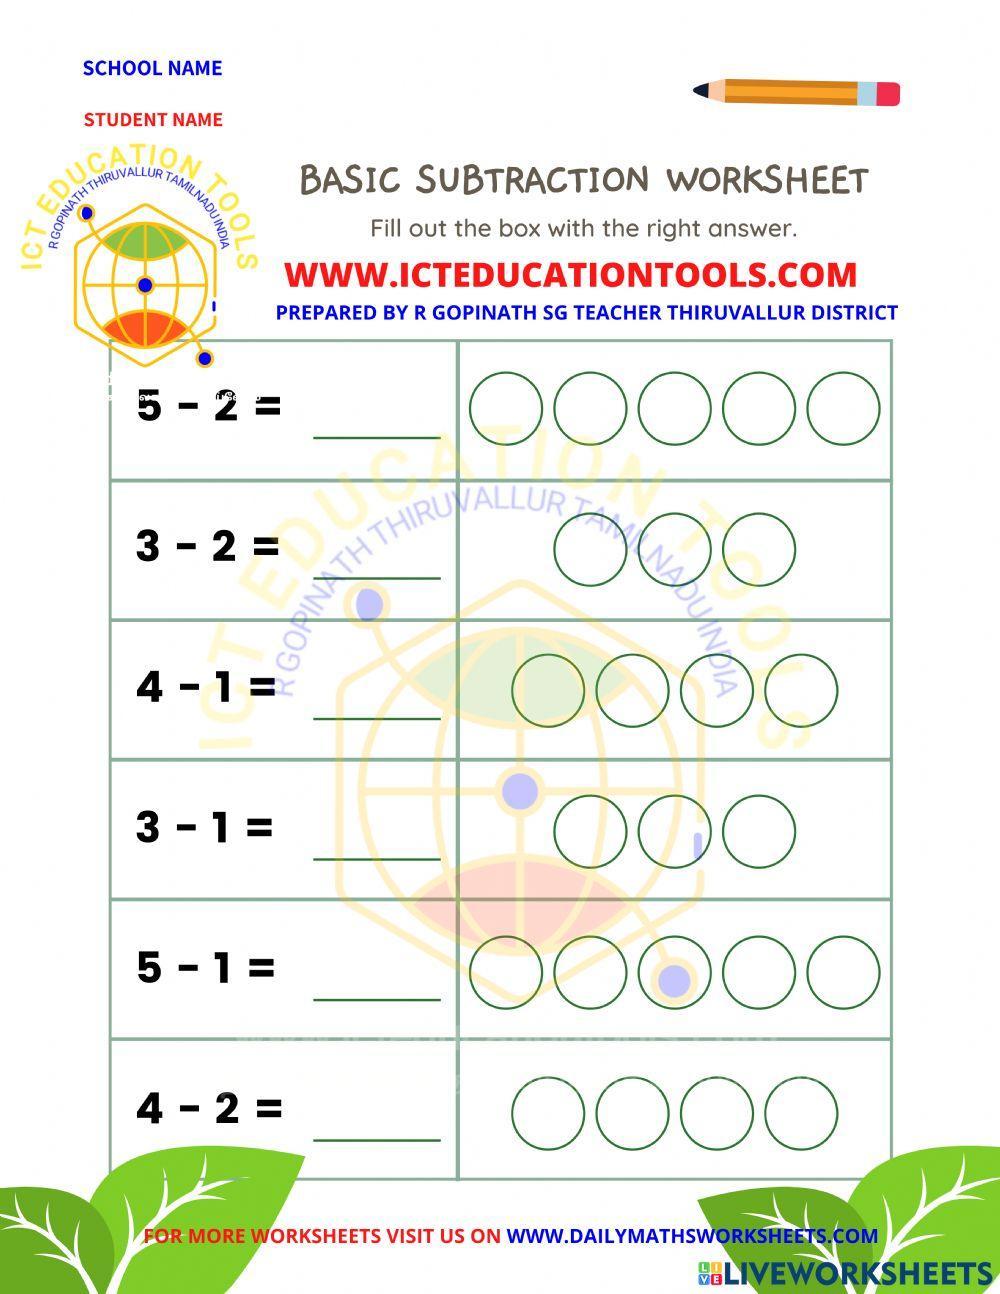 Maths worksheets subtraction